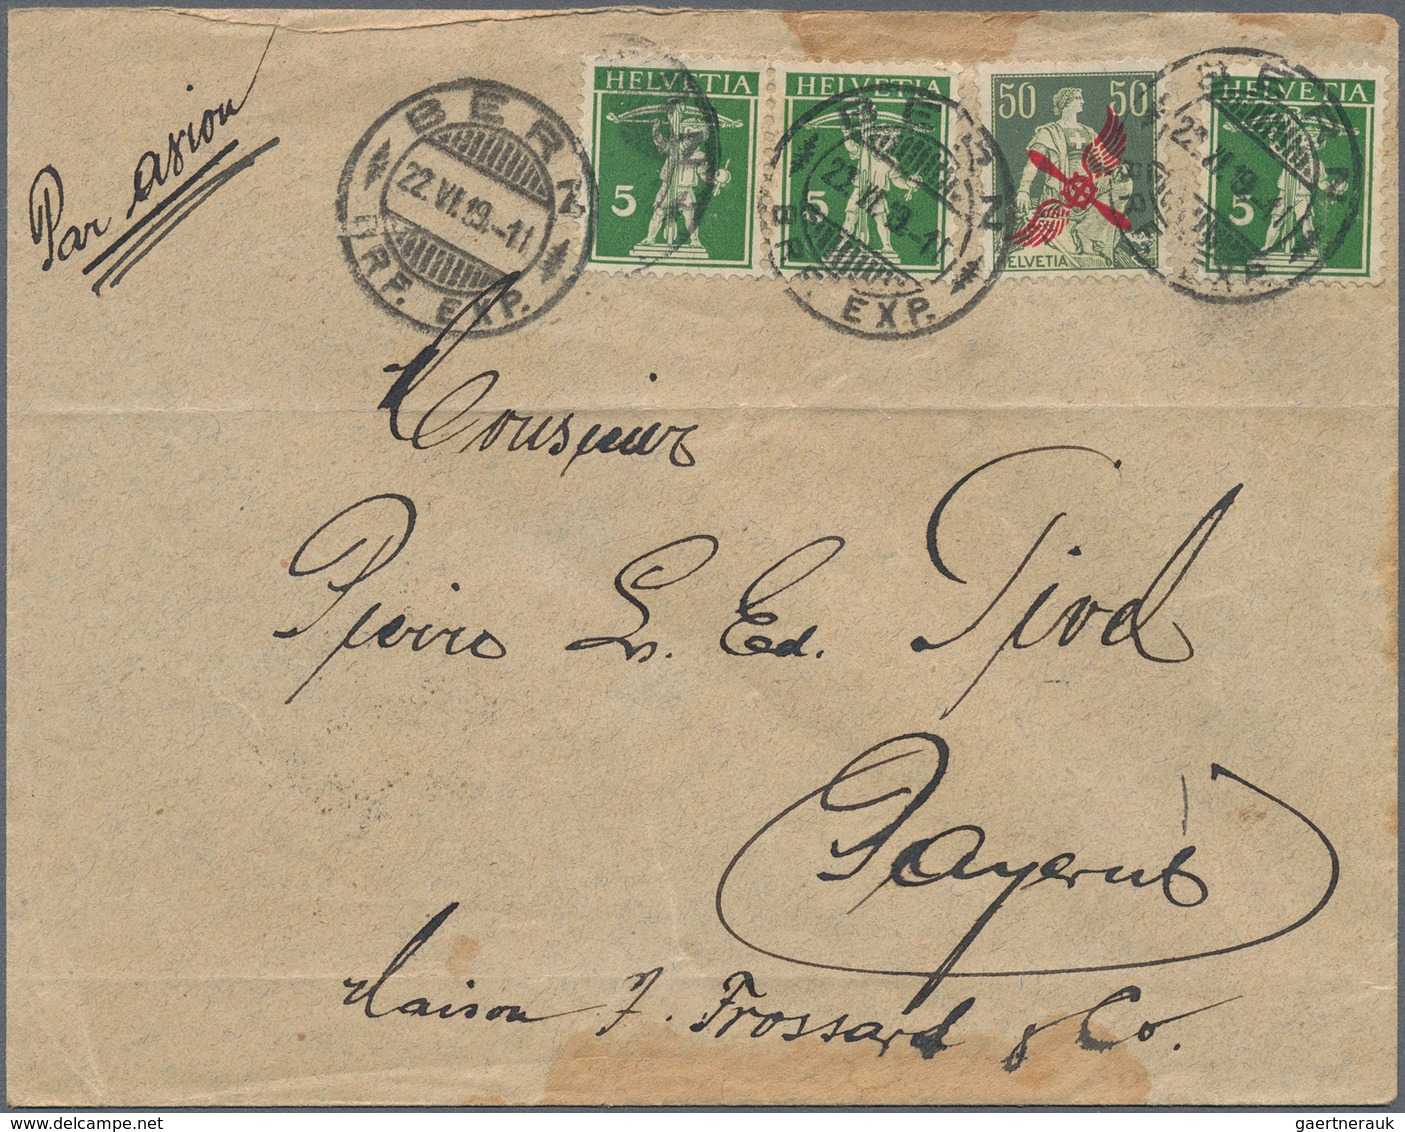 Europa - West: 1890/1945, lot of ca. 200 covers, cards and postal stationeries with many interesting